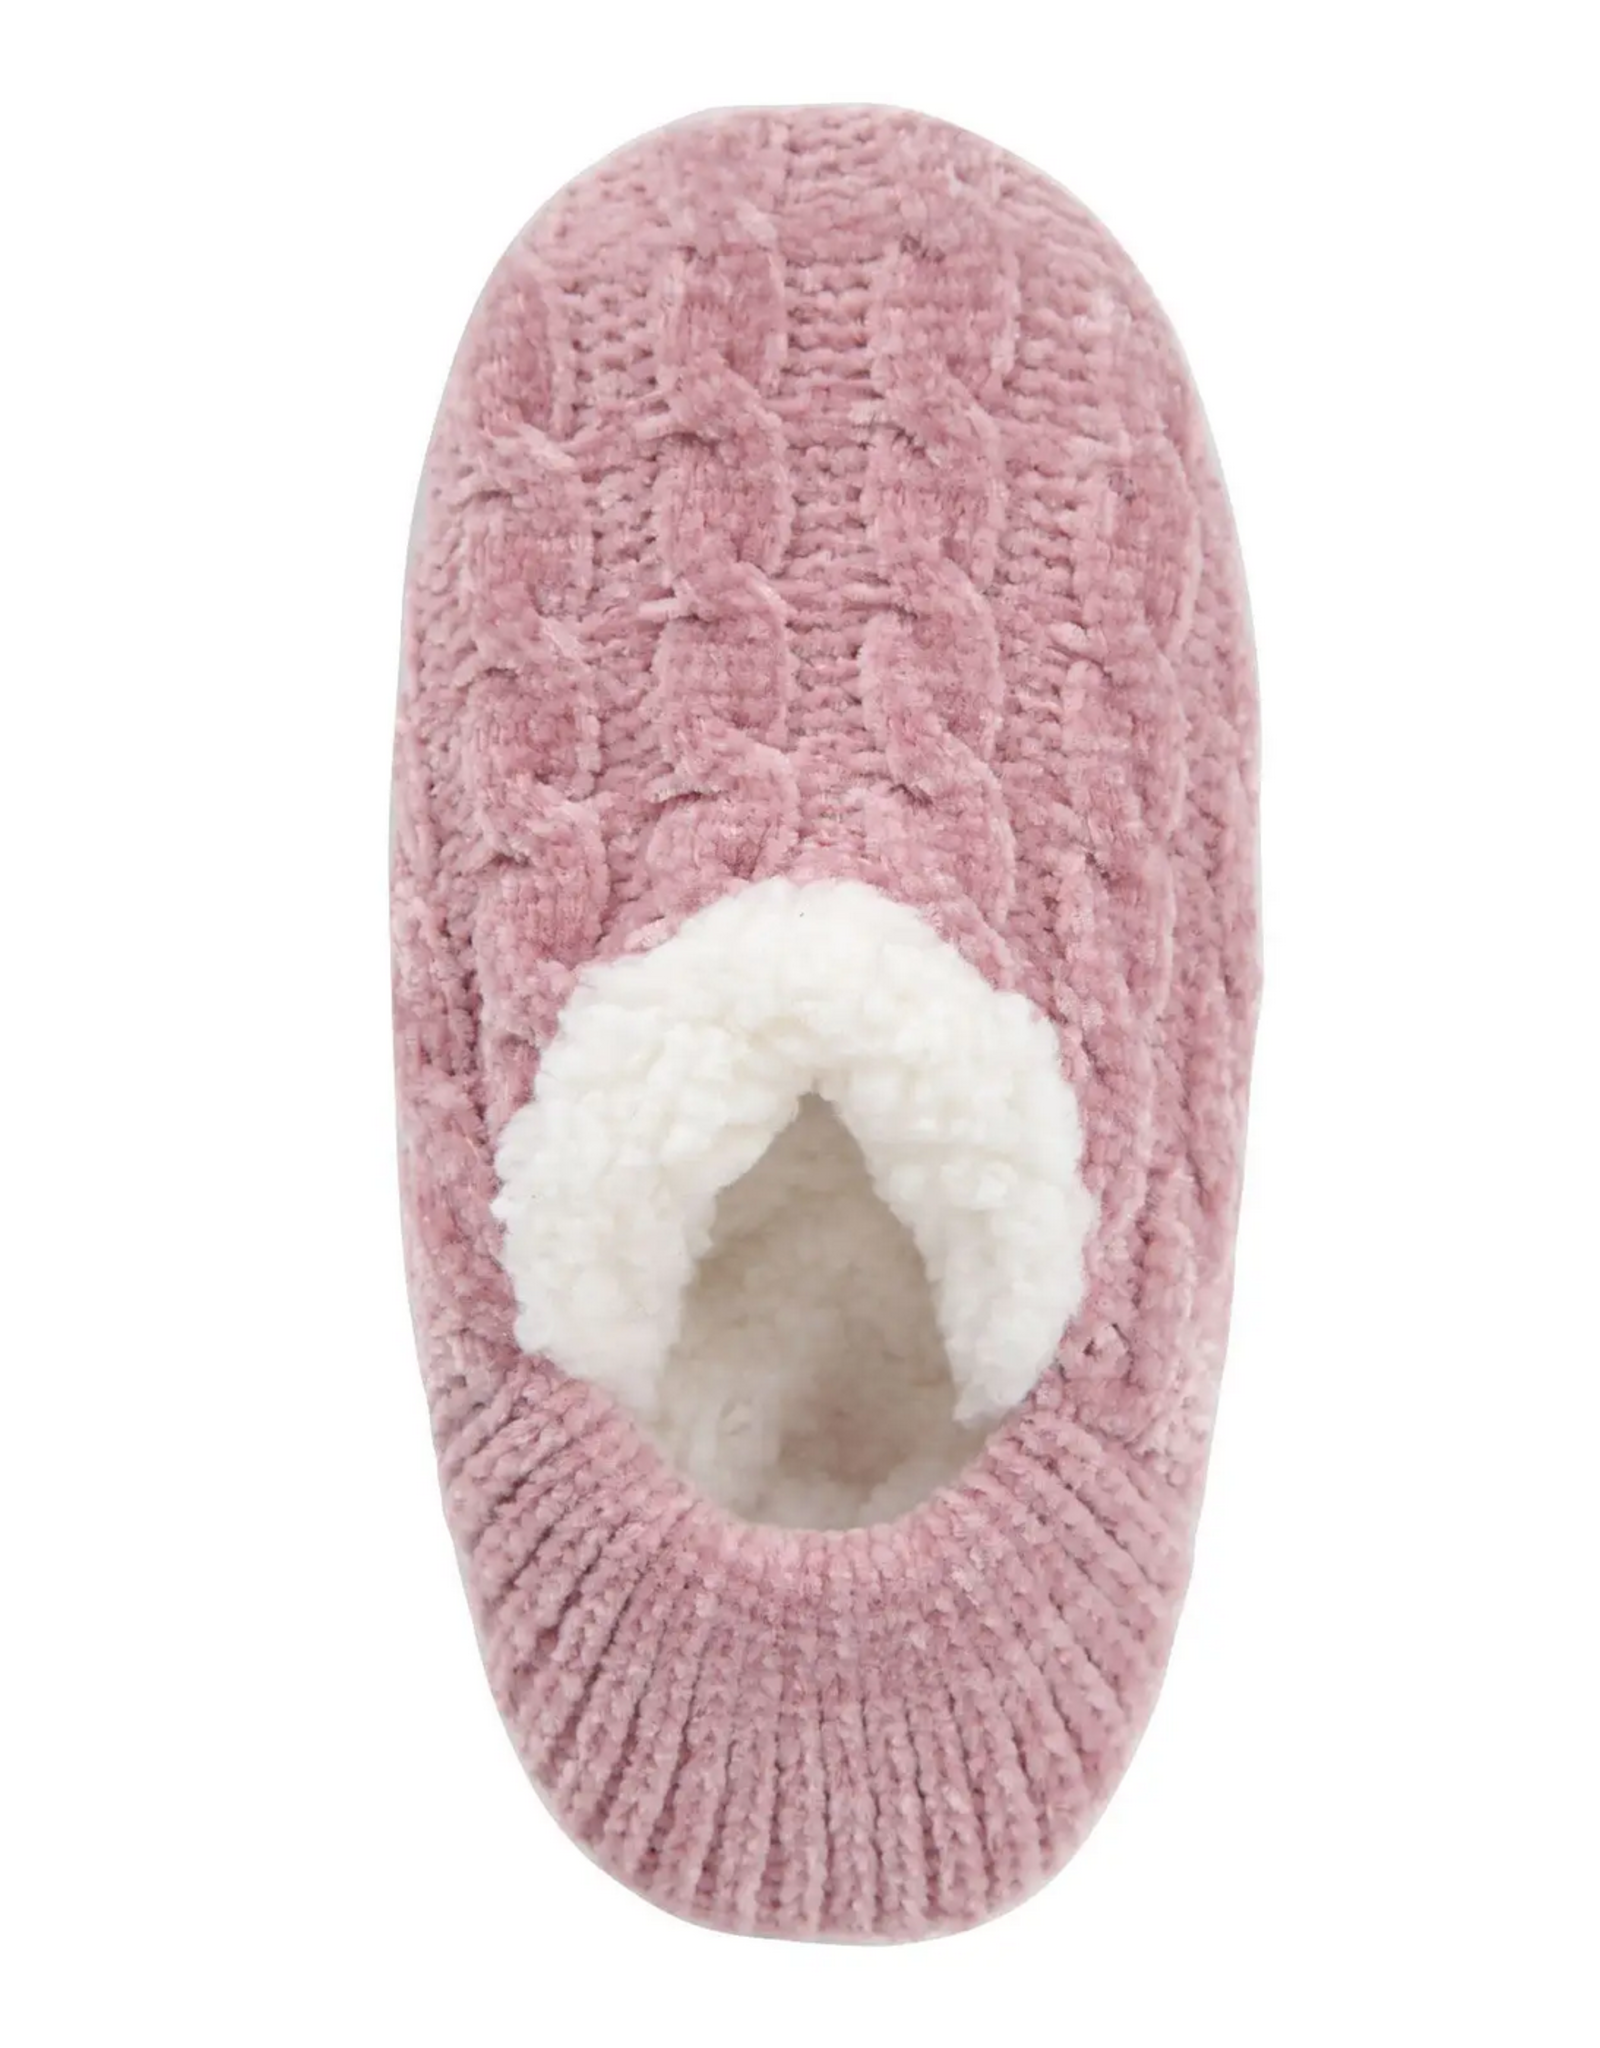 Me Moi Cable Knit Chenille Slipper